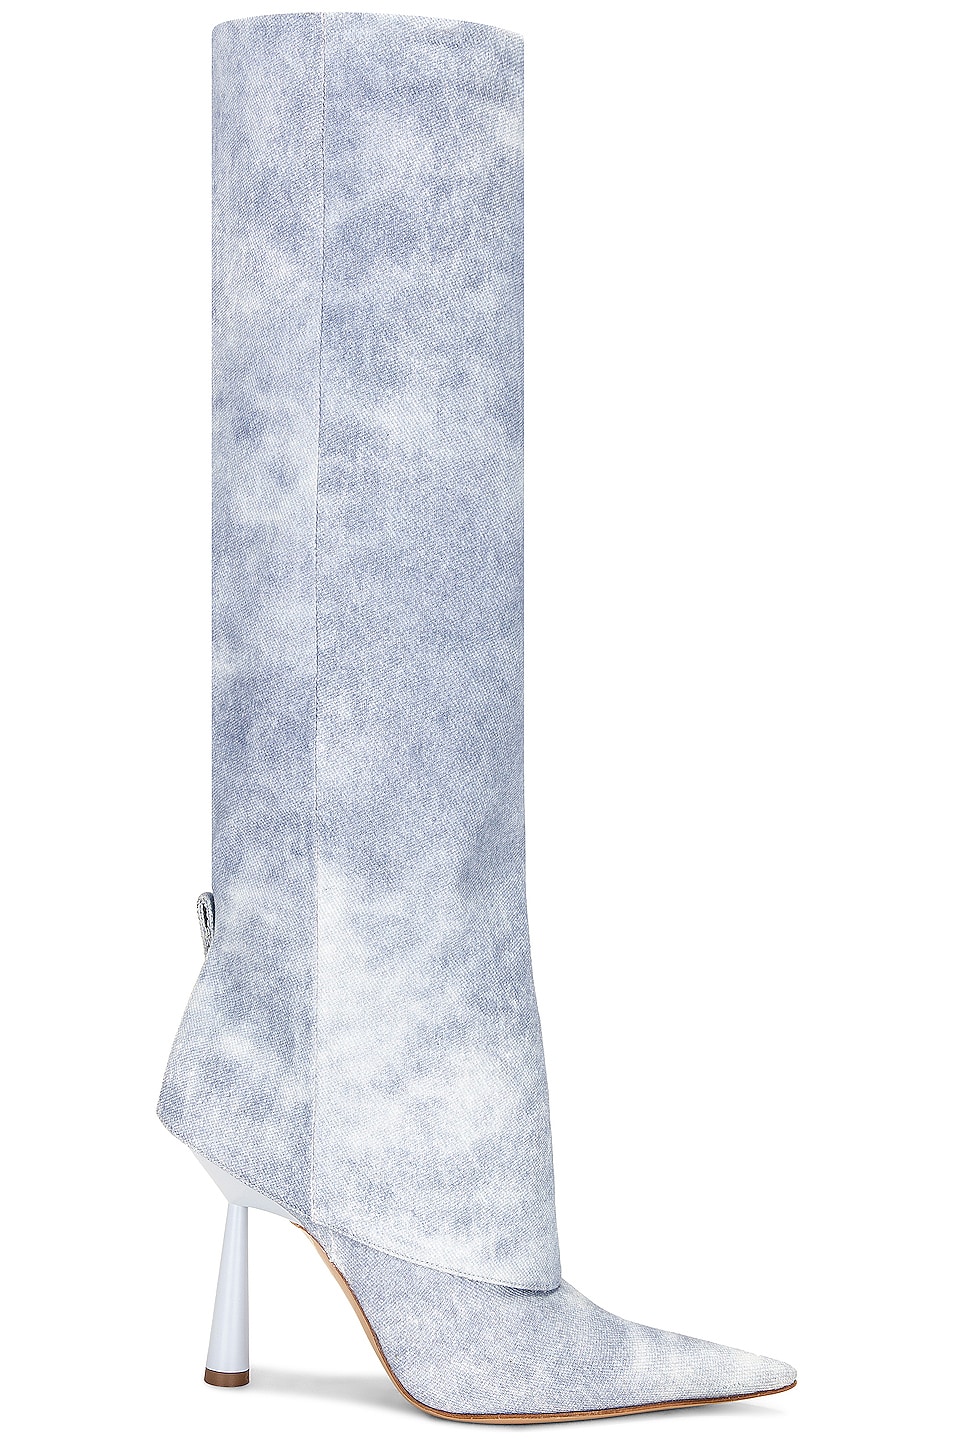 Image 1 of GIA BORGHINI X RHW Folded Knee High Boot in Blue Jeans